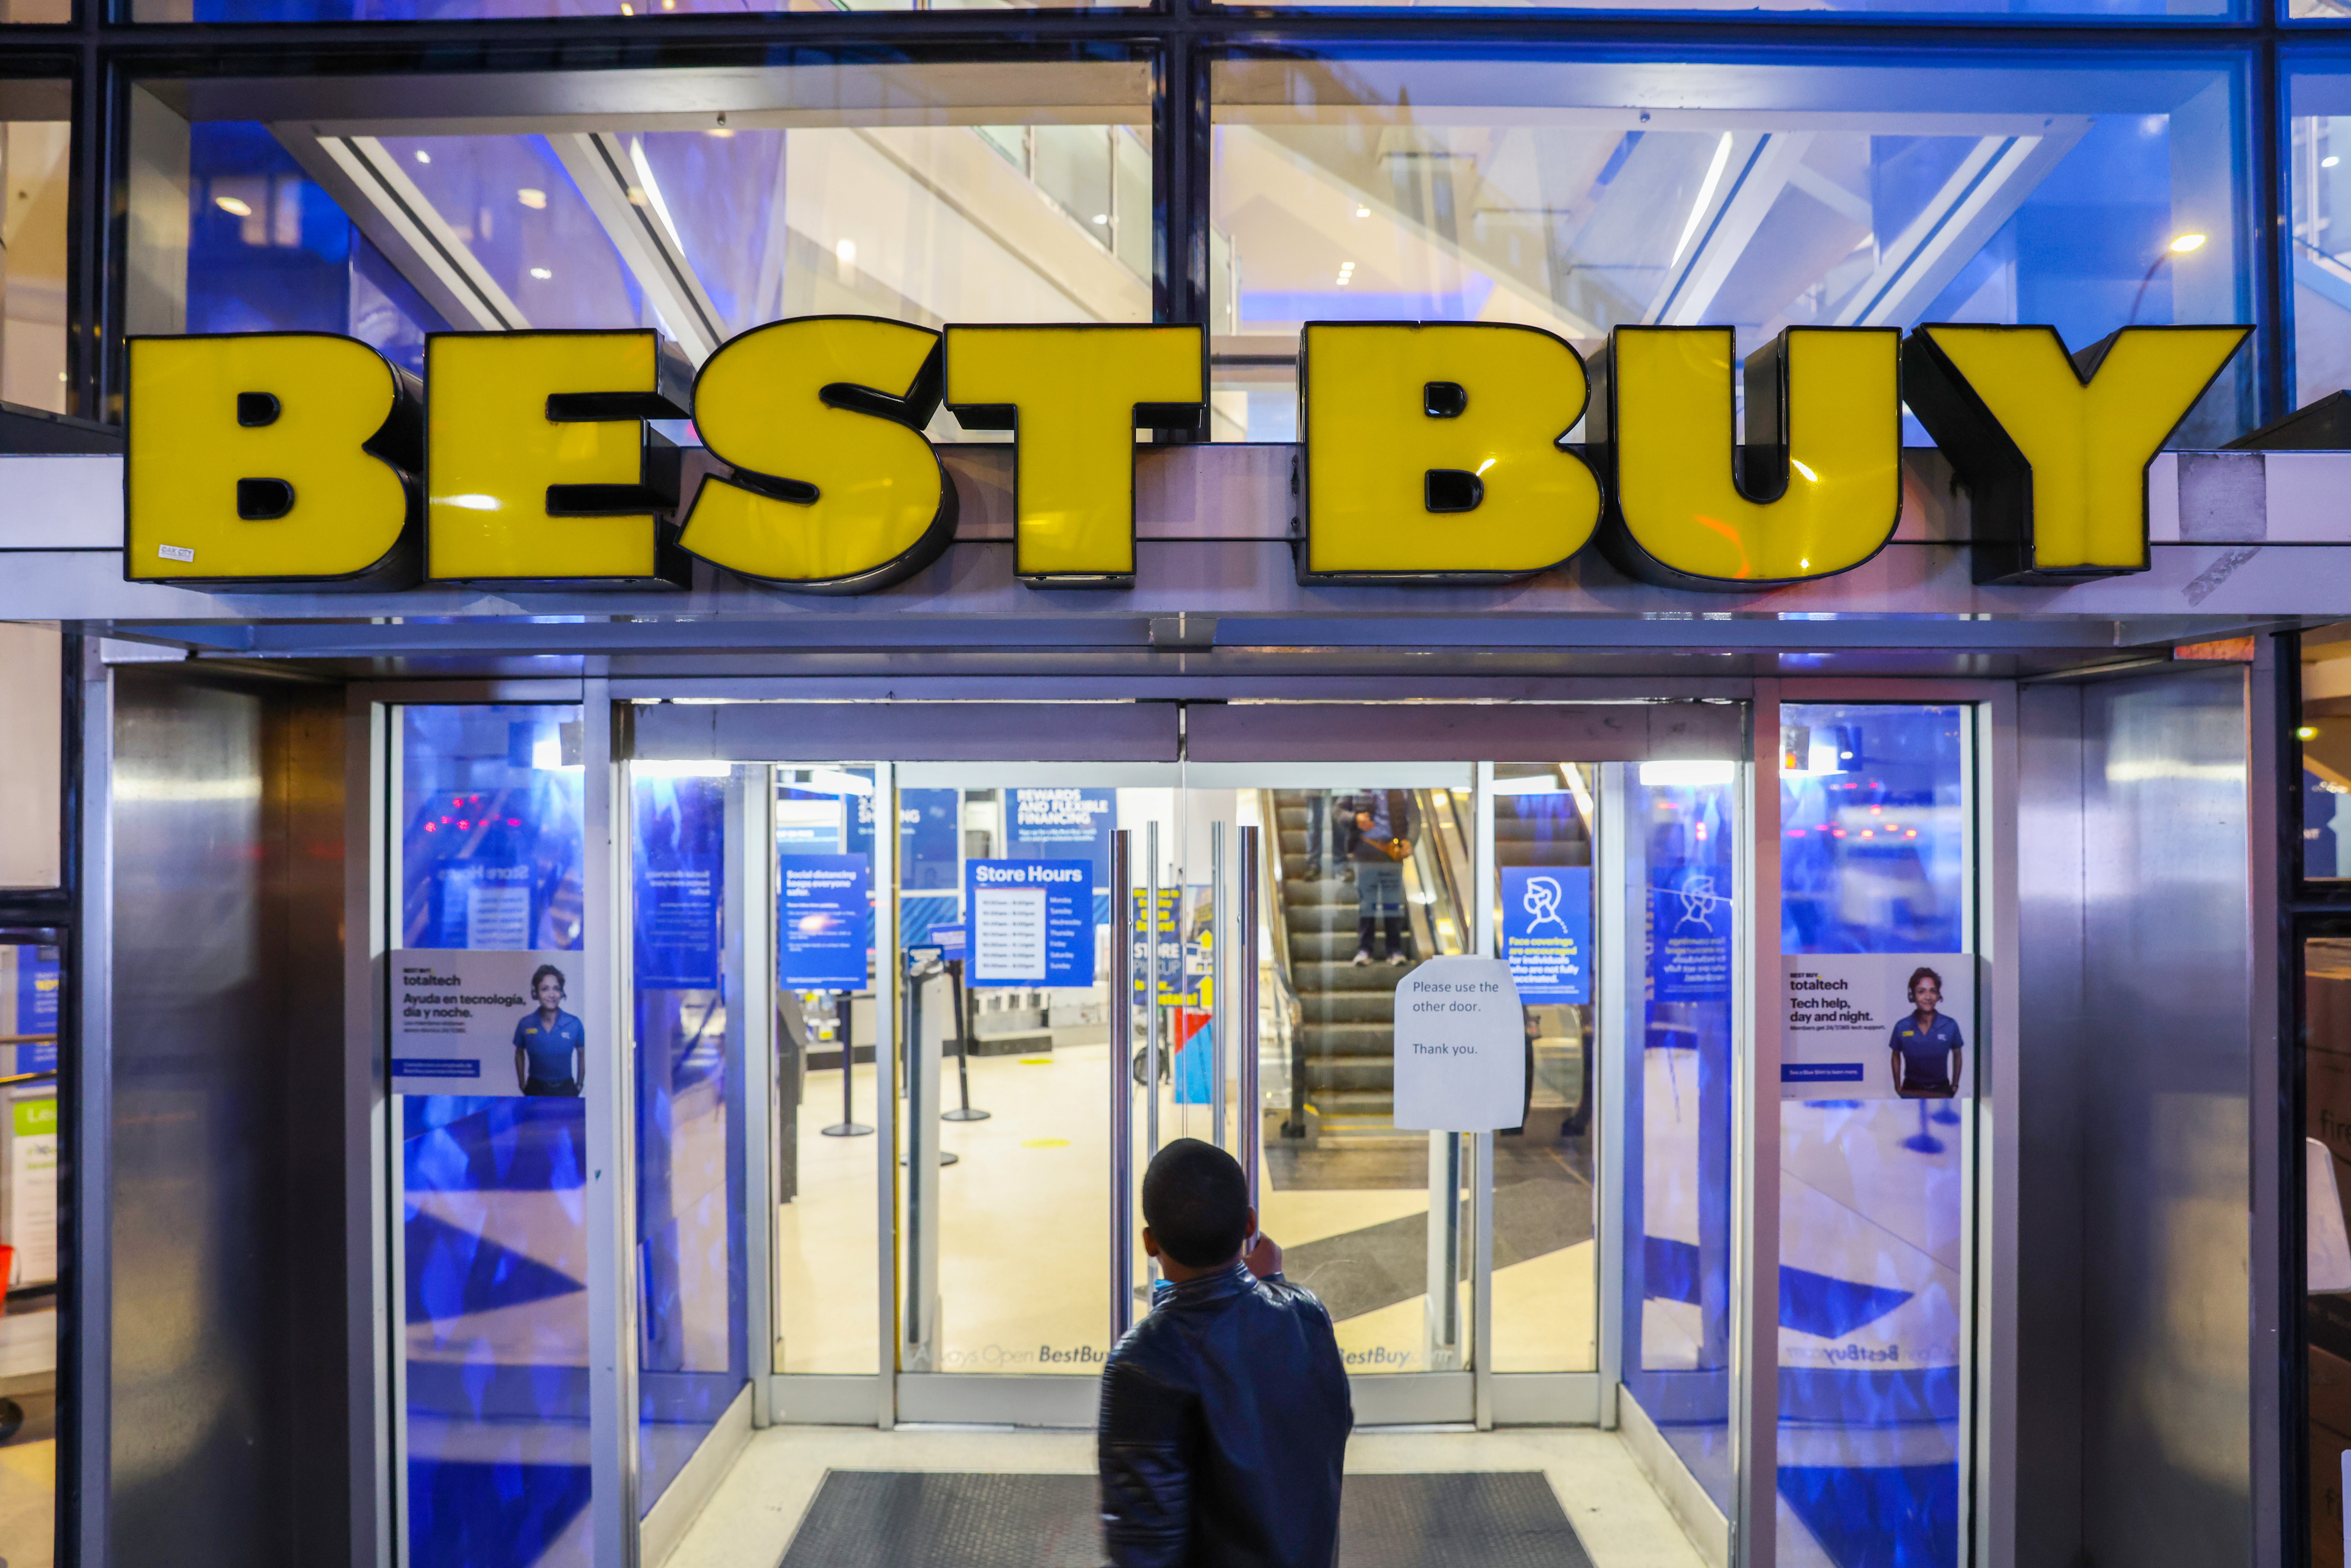 A person enters a Best Buy store in Manhattan, New York City